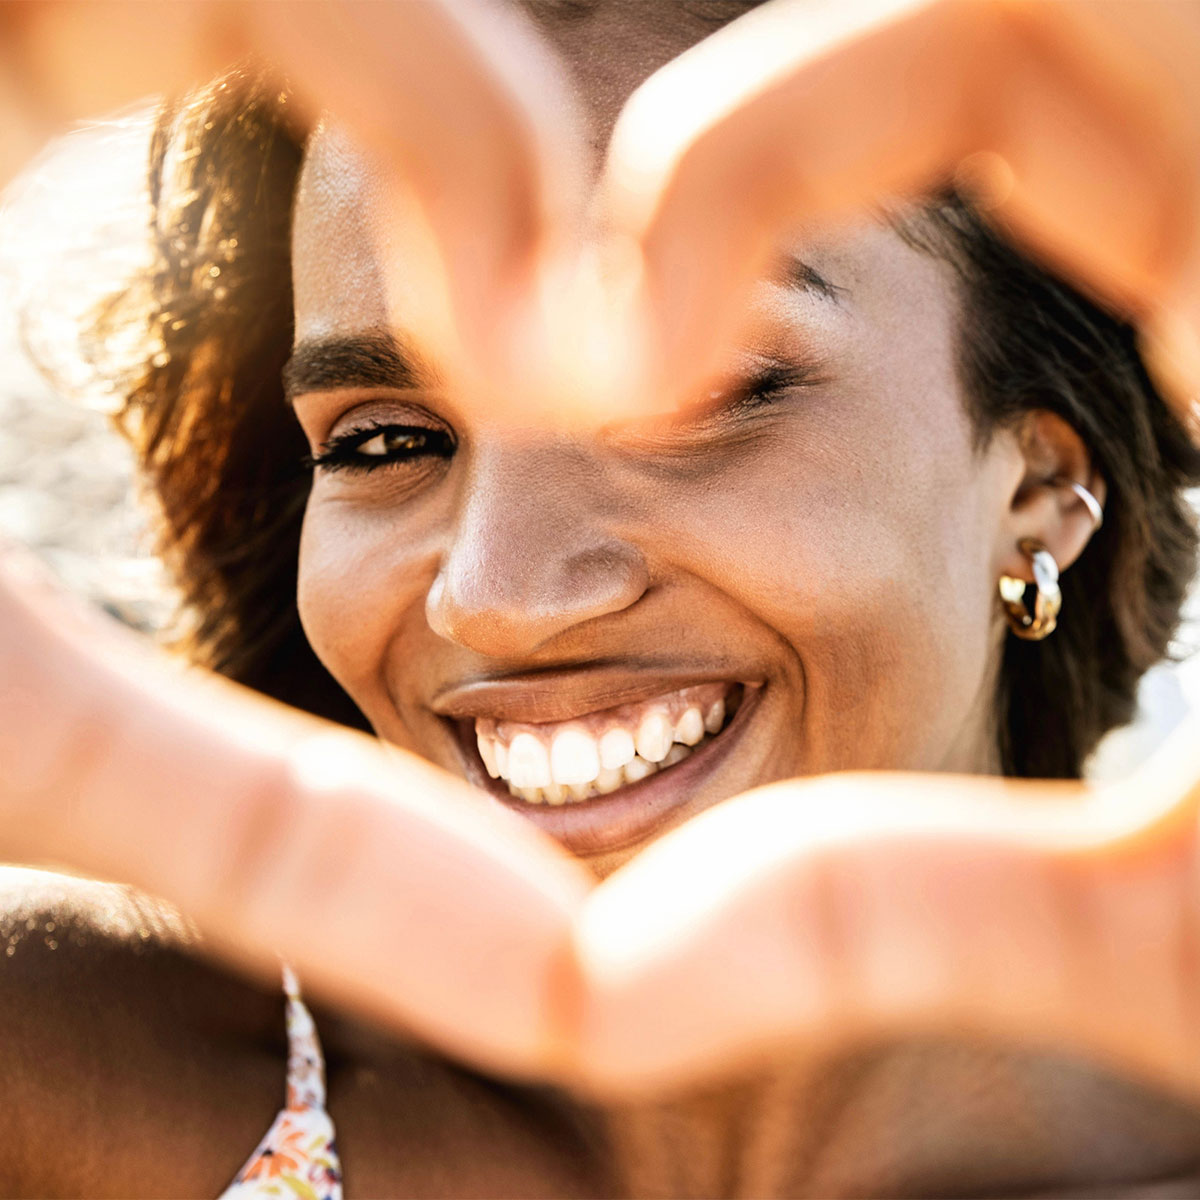 woman smiling and making a heart with her fingers